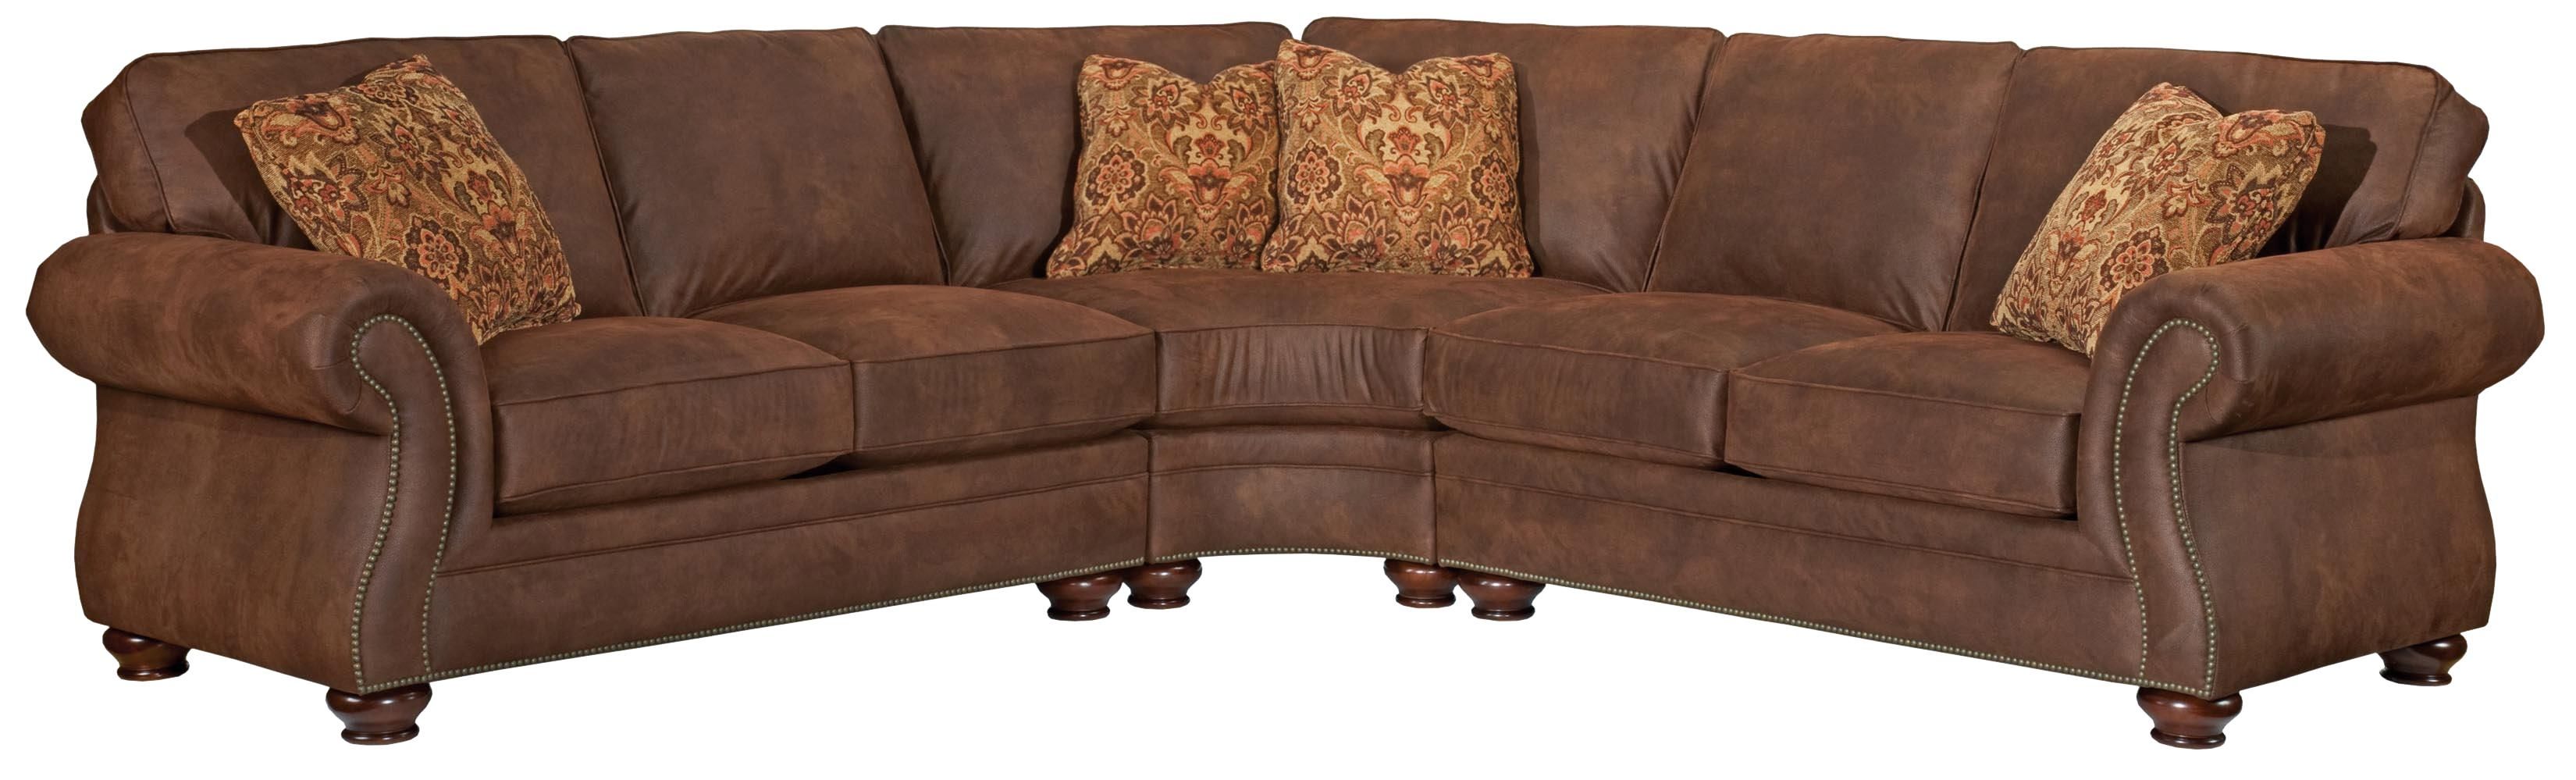 Broyhill Furniture Laramie 3 Piece Wedge Sectional Sofa Wayside Throughout Broyhill Sectional Sofas (Photo 1 of 15)